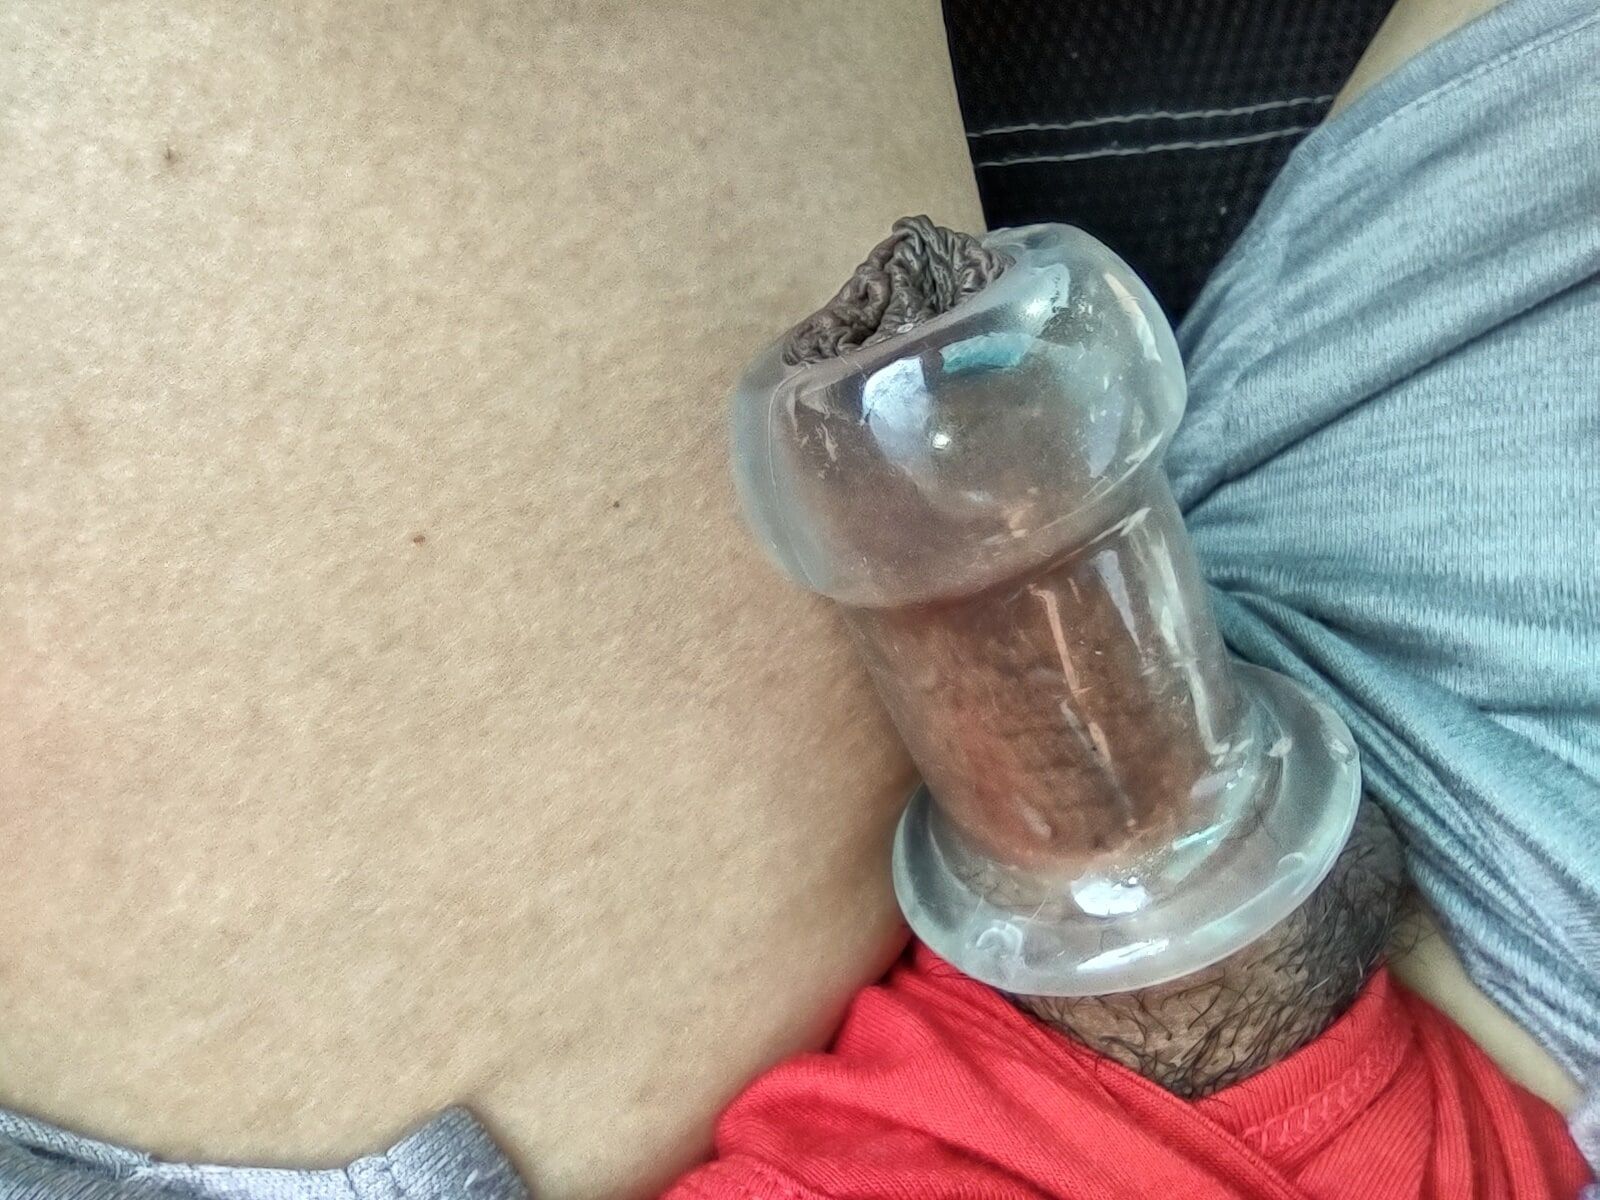 Finding more ways for my Asian cock #6